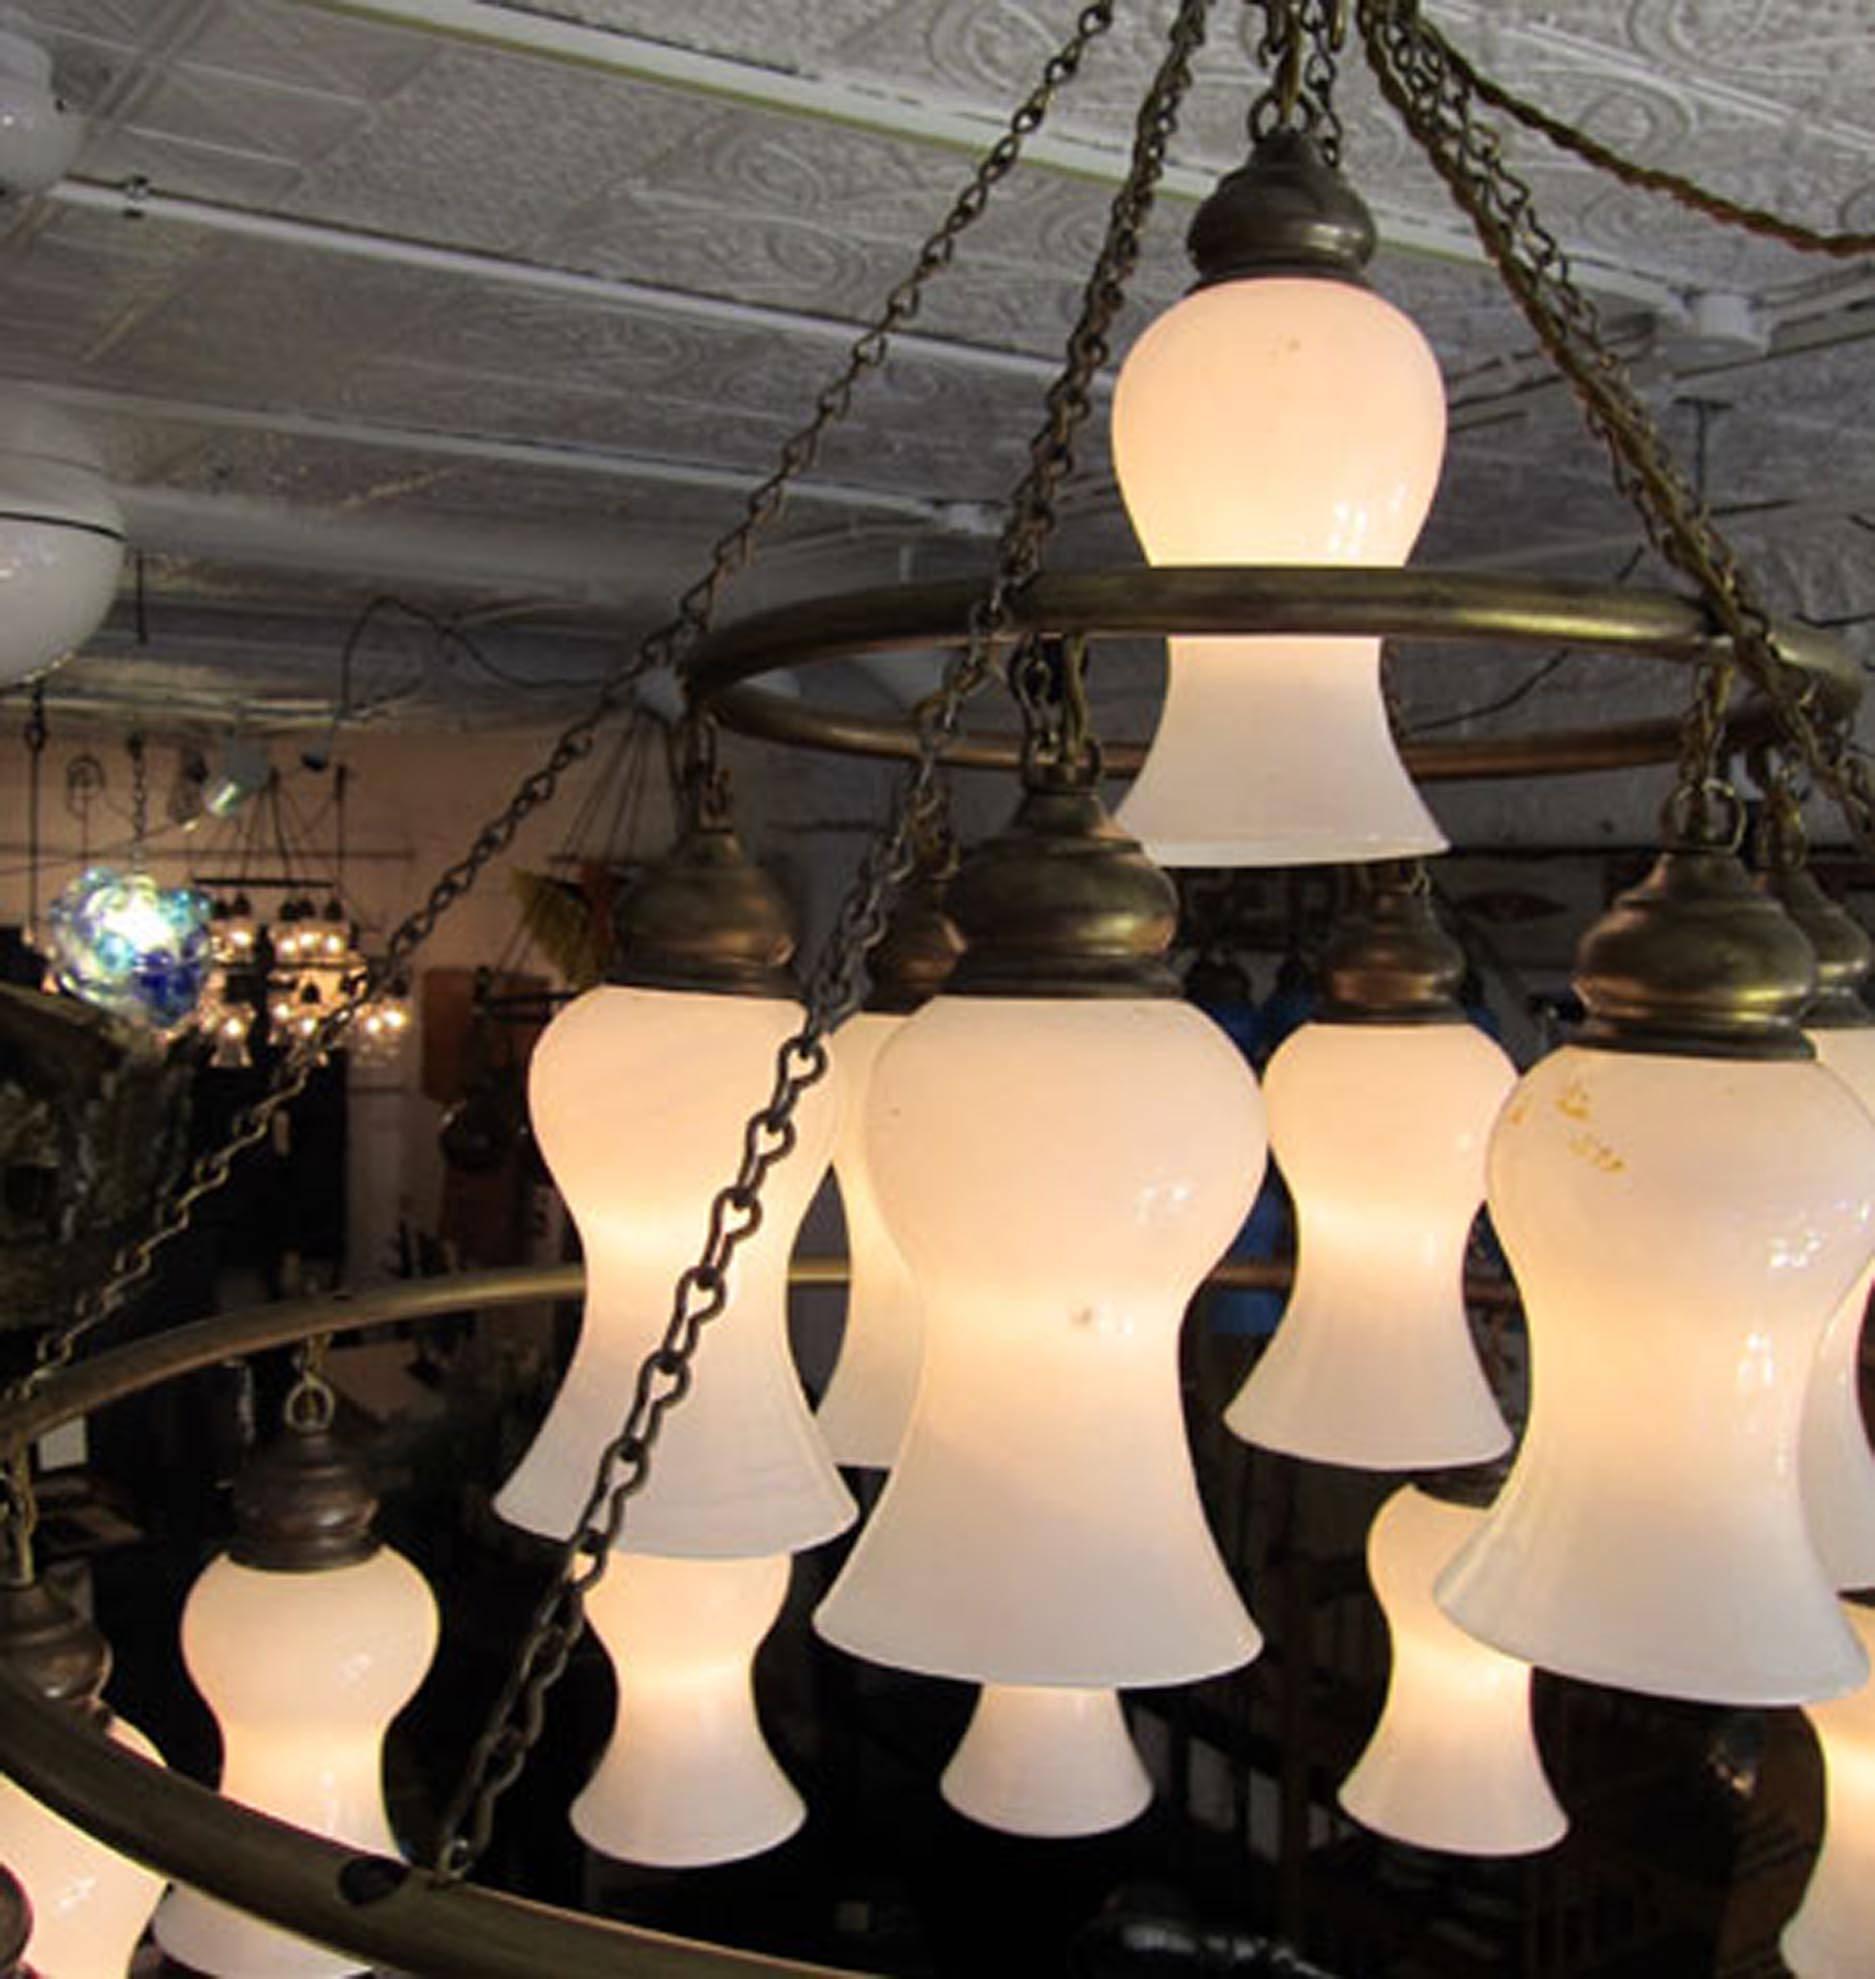 Custom Three-Tier Egyptian Teardrop Chandelier In Excellent Condition For Sale In Sag Harbor, NY